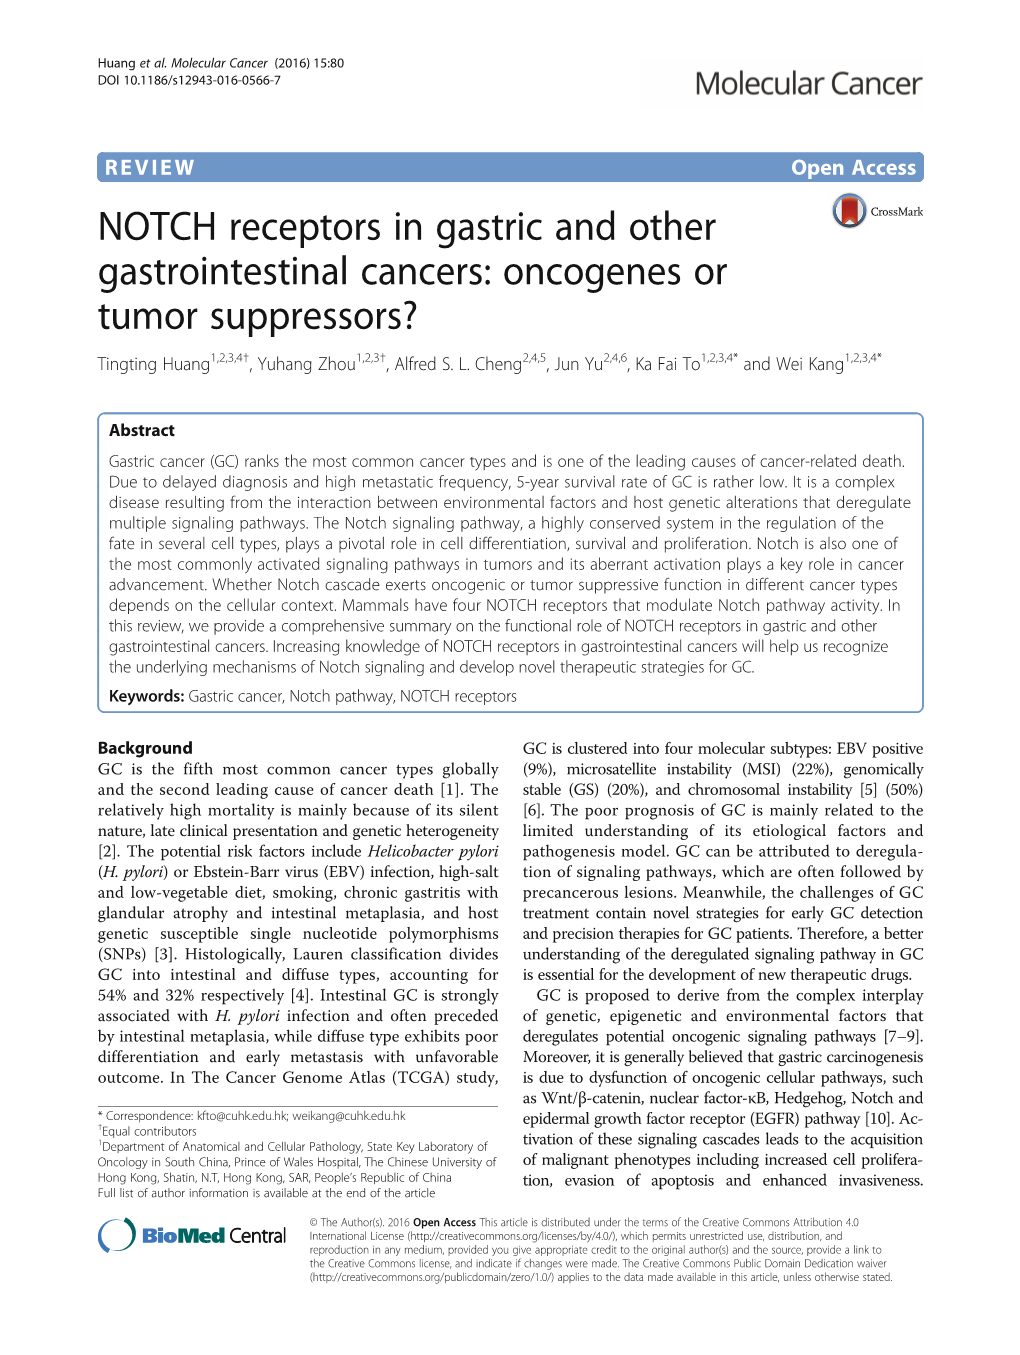 NOTCH Receptors in Gastric and Other Gastrointestinal Cancers: Oncogenes Or Tumor Suppressors? Tingting Huang1,2,3,4†, Yuhang Zhou1,2,3†, Alfred S